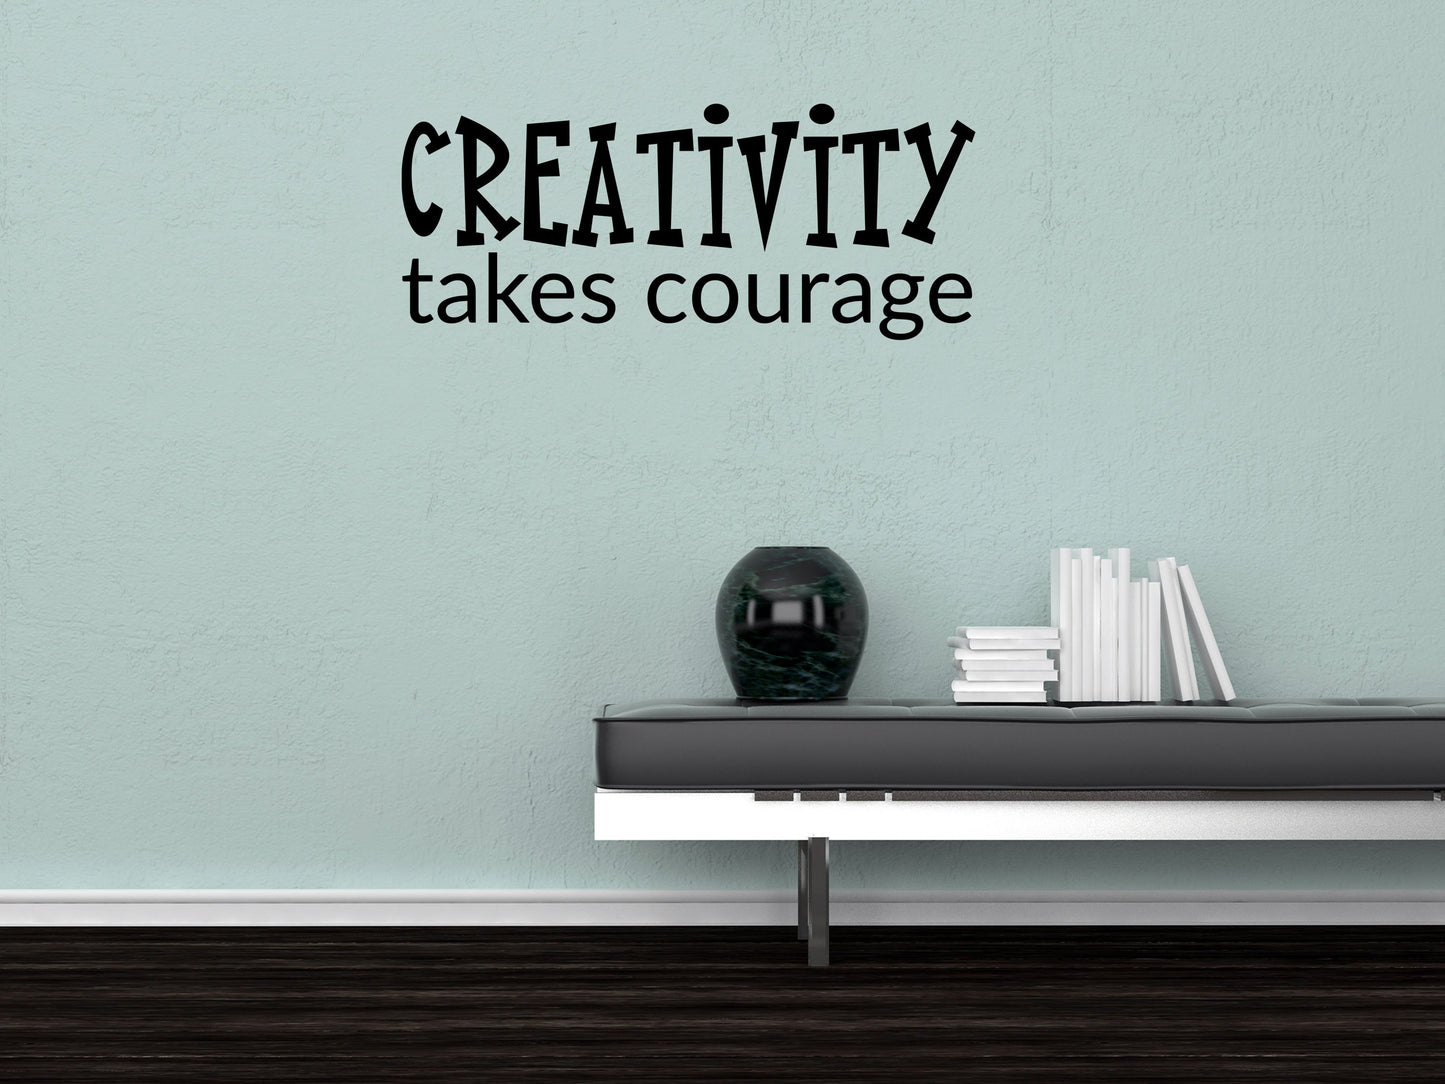 Creativity Takes Courage - Inspirational Wall Decals Vinyl Wall Decal Inspirational Wall Signs 